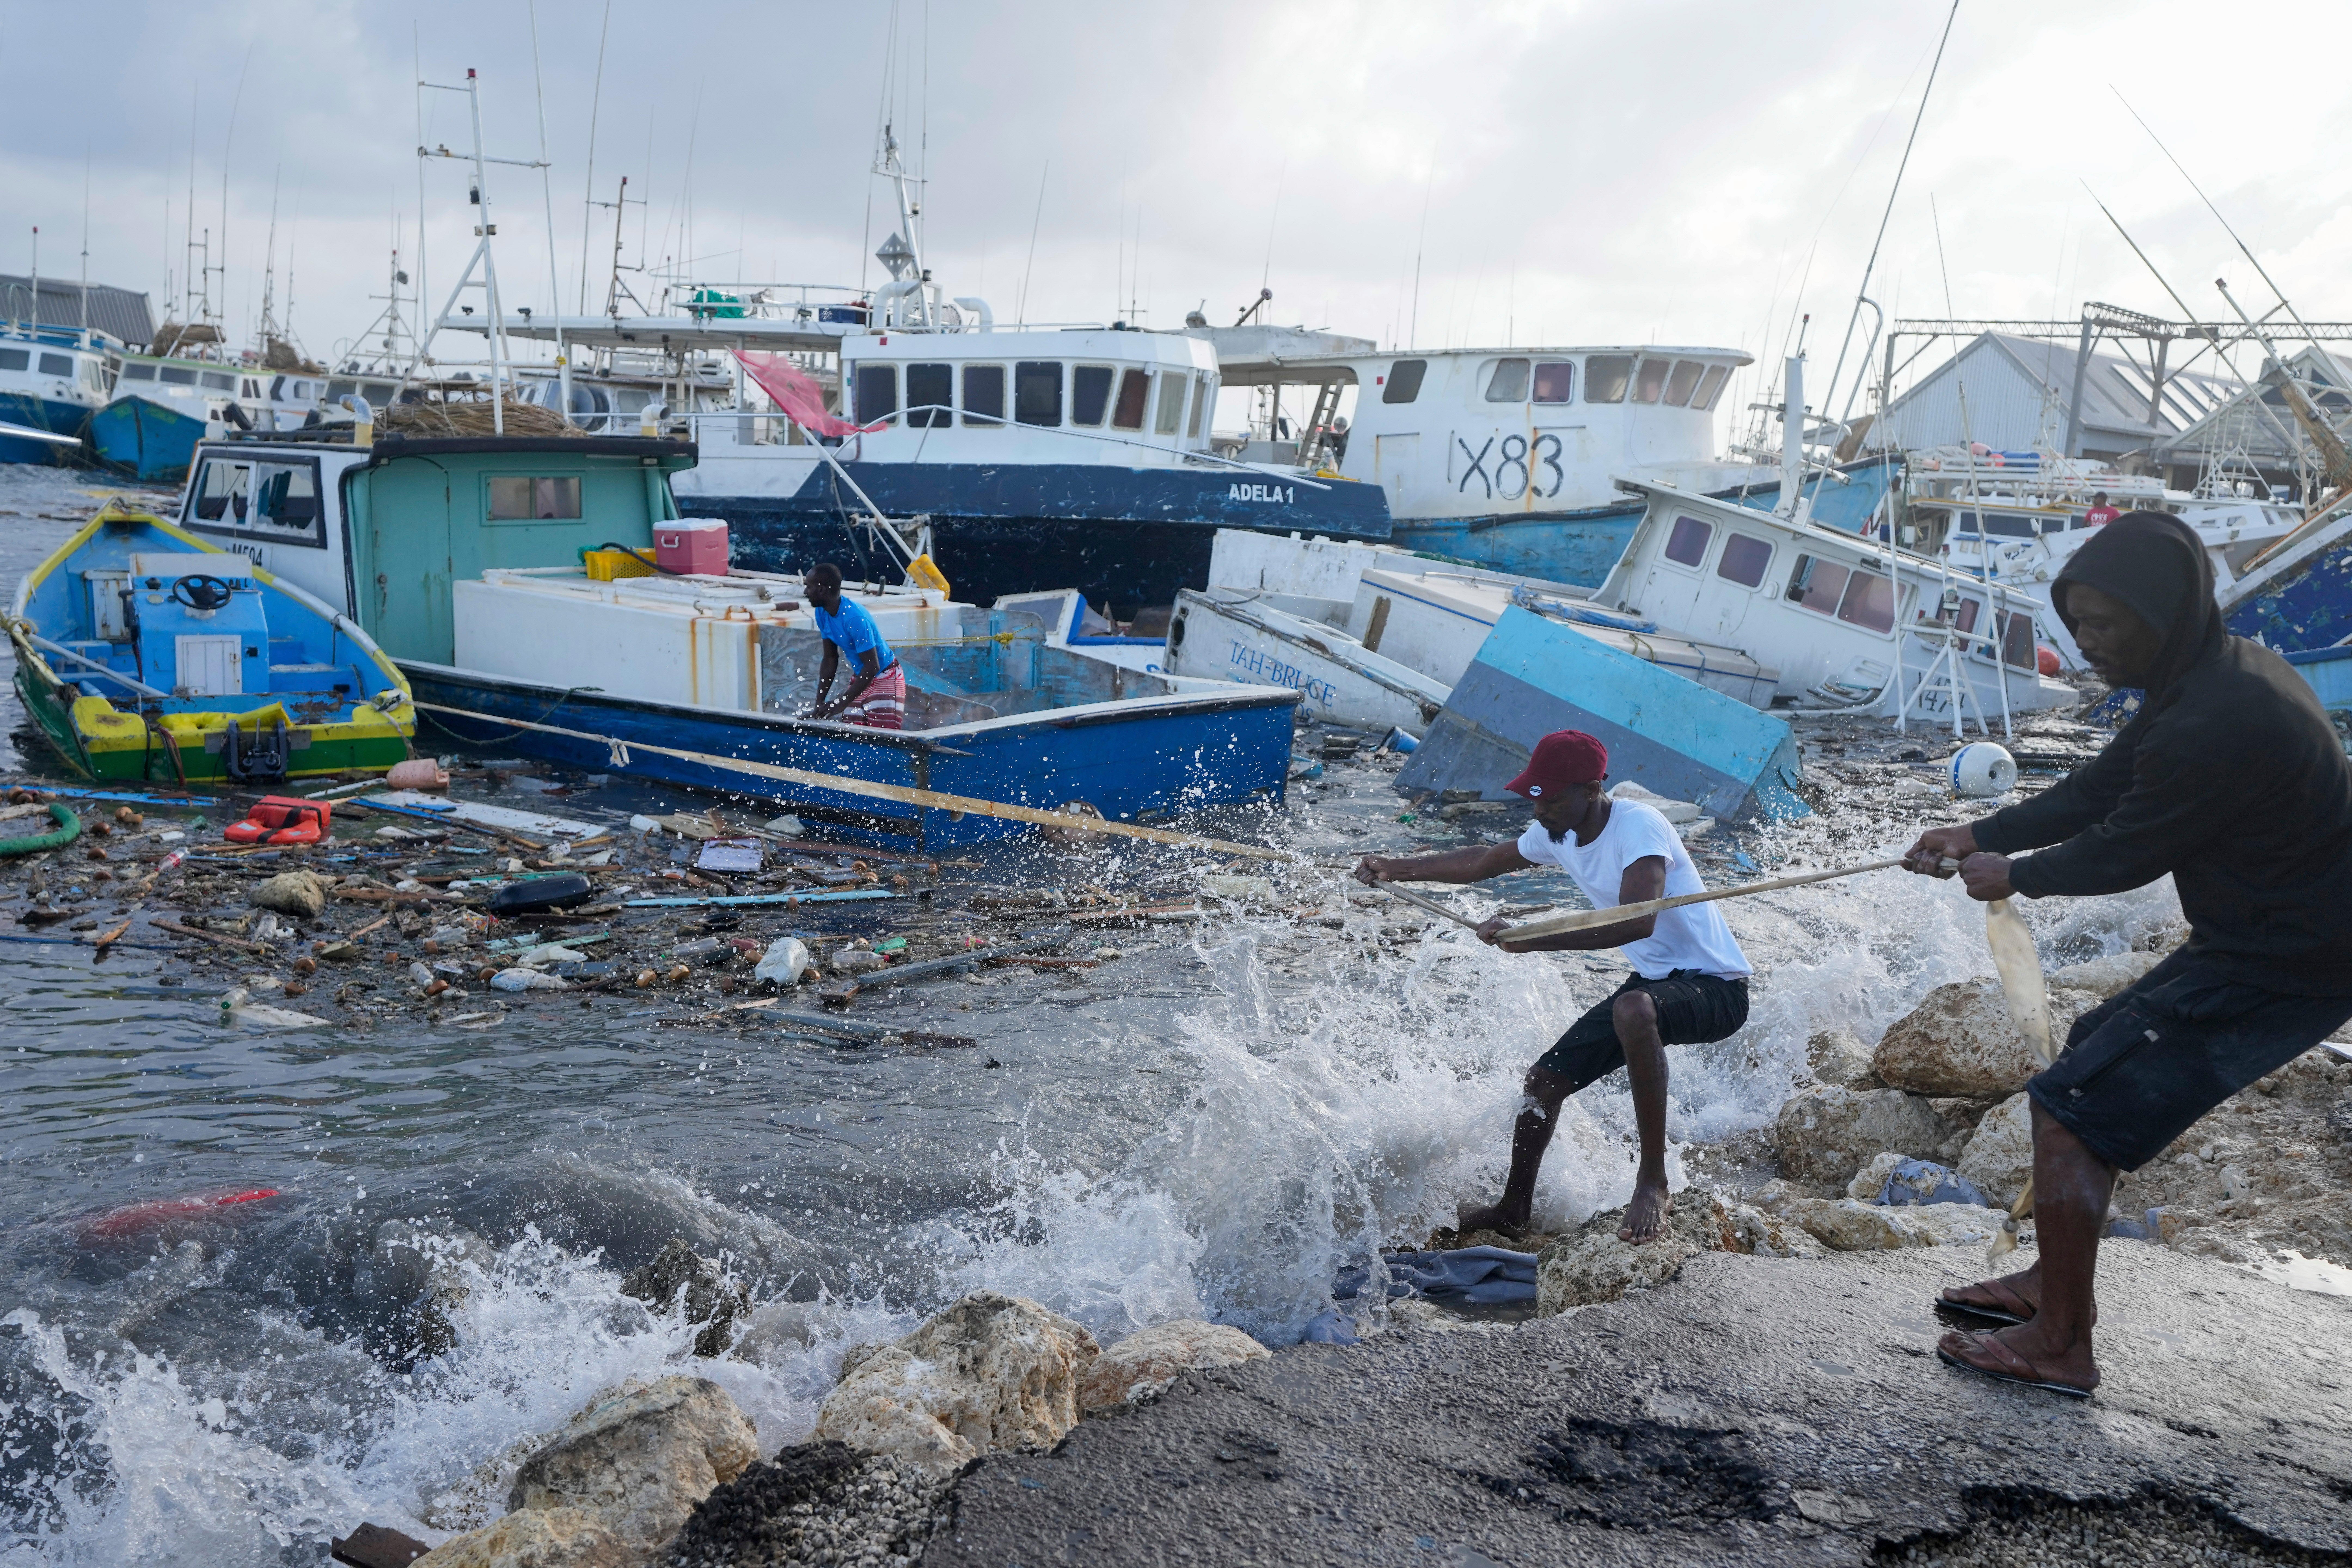 Fishermen attempt to pull a destroyed boat out of the water after Hurricane Beryl roared through Barbados on Monday